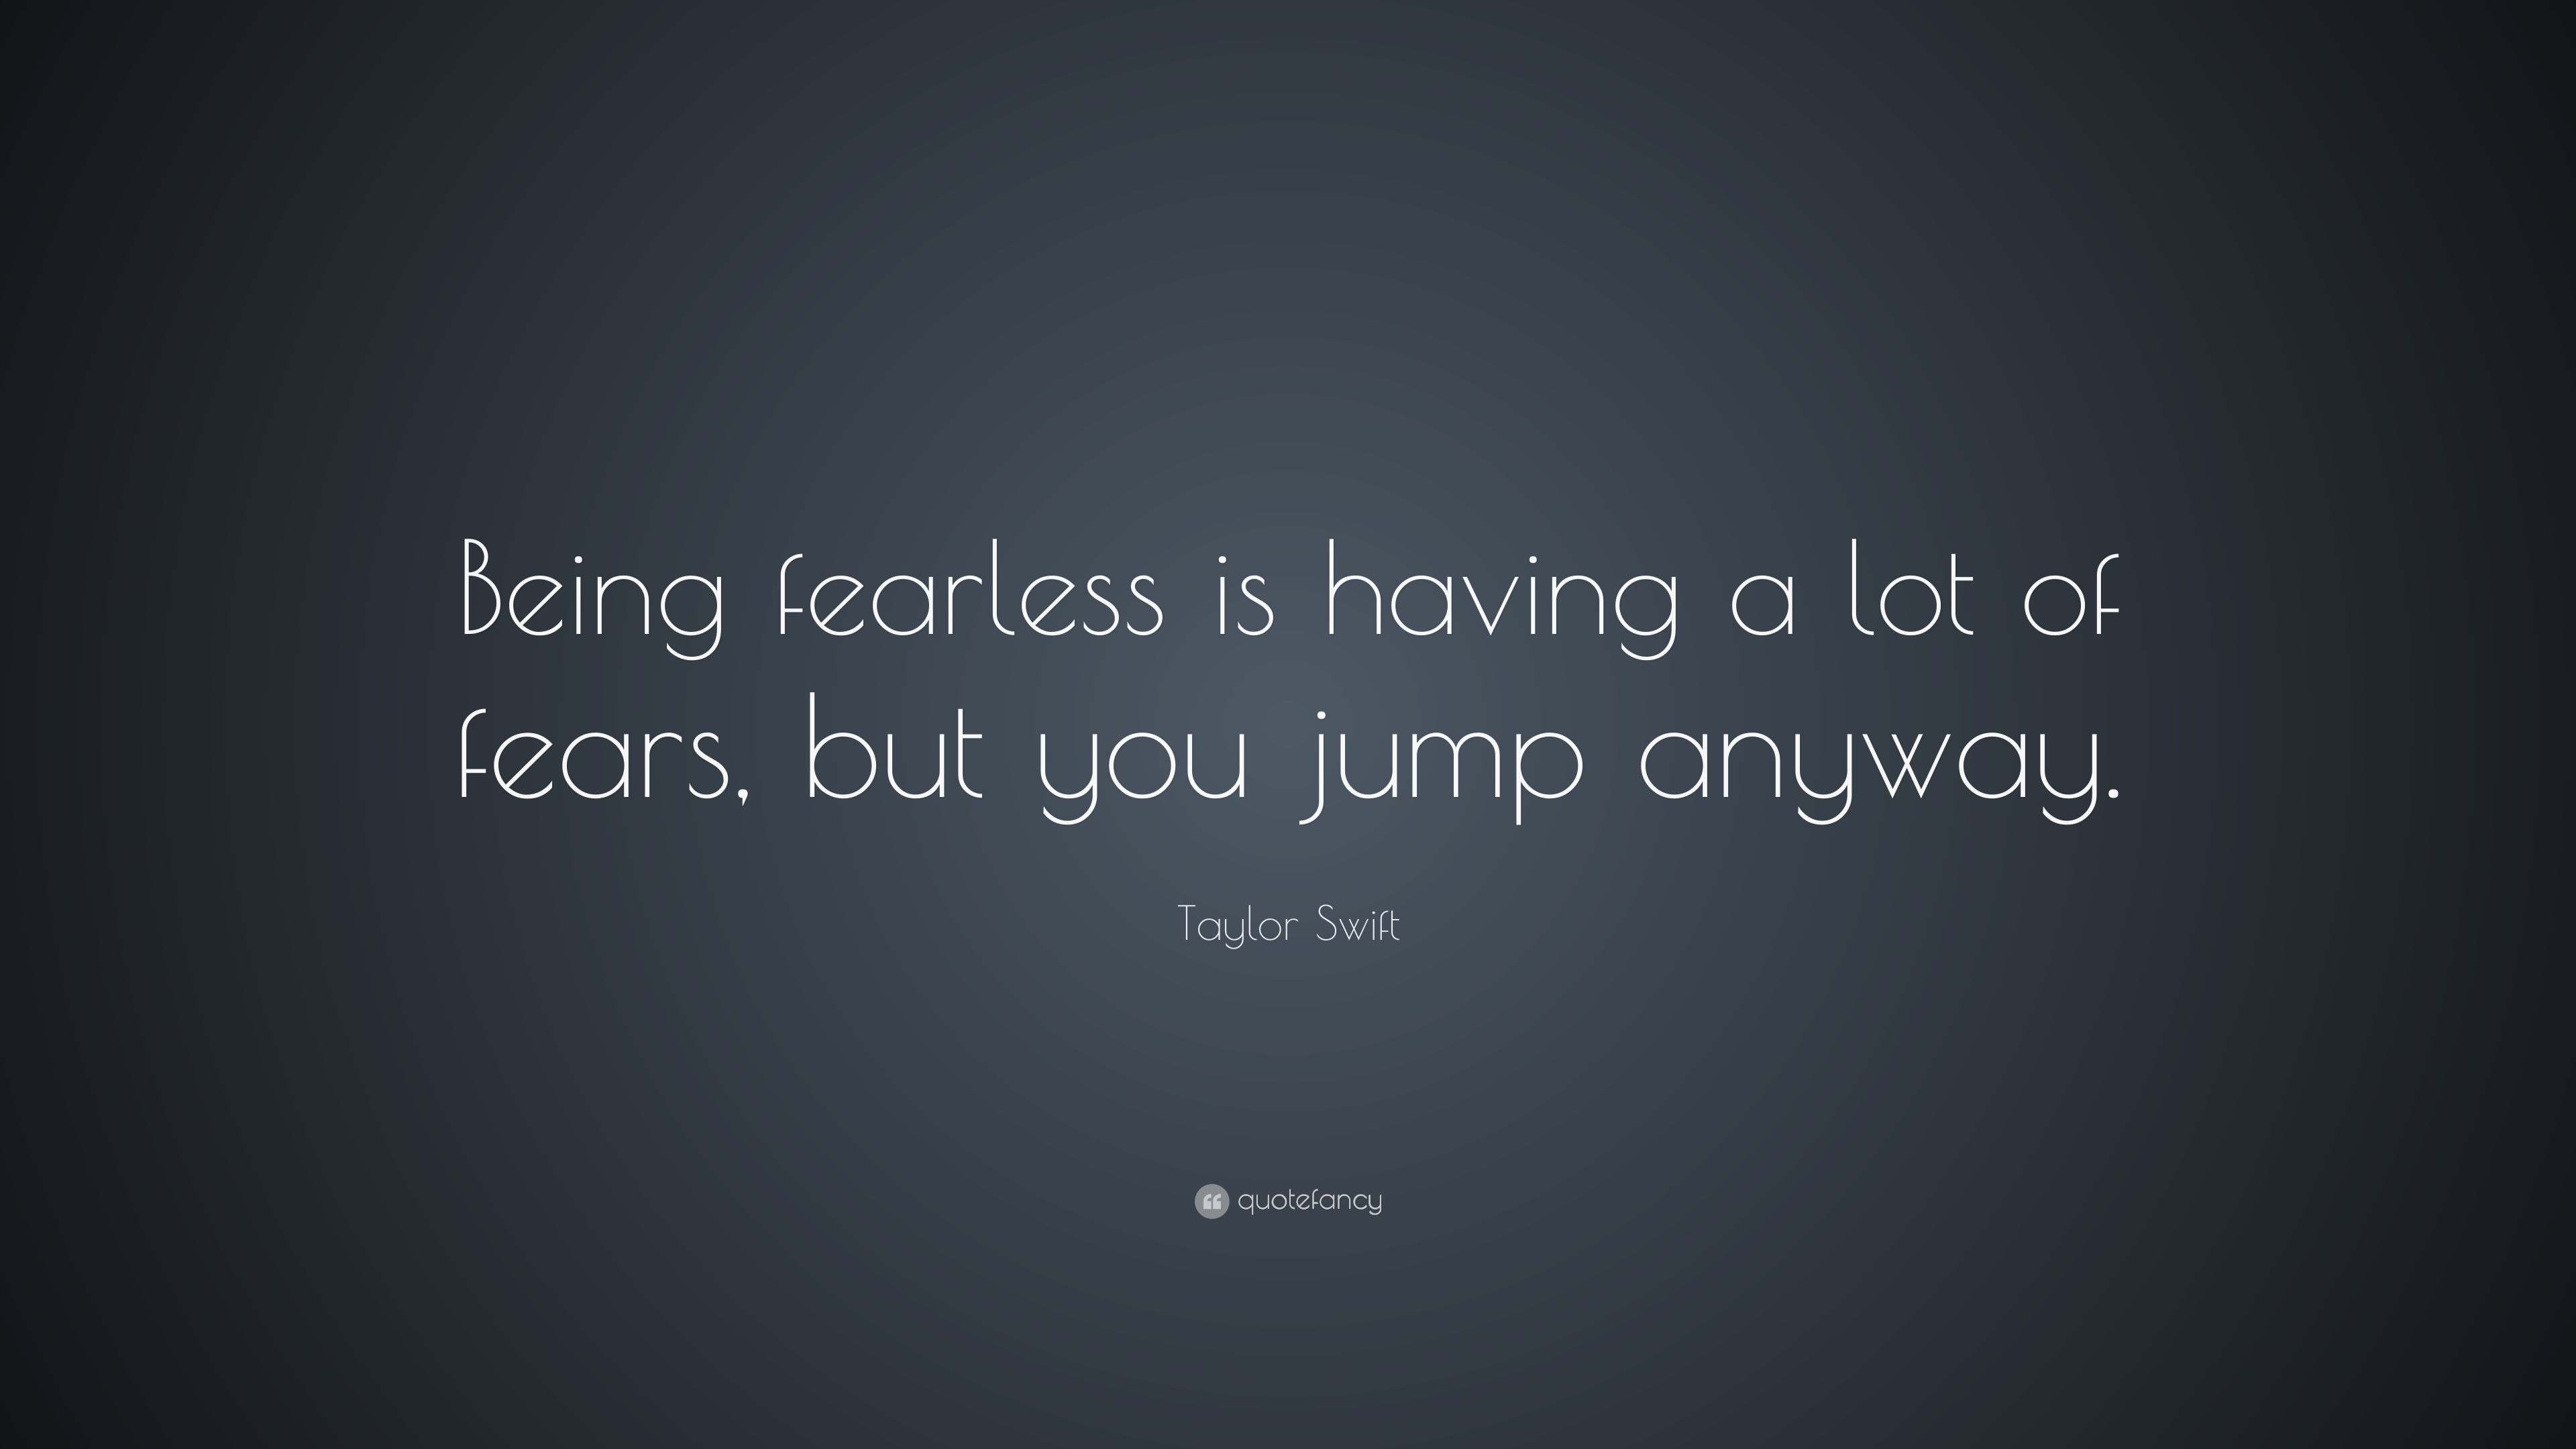 Taylor Swift Quote Being fearless is having a lot of fears, but